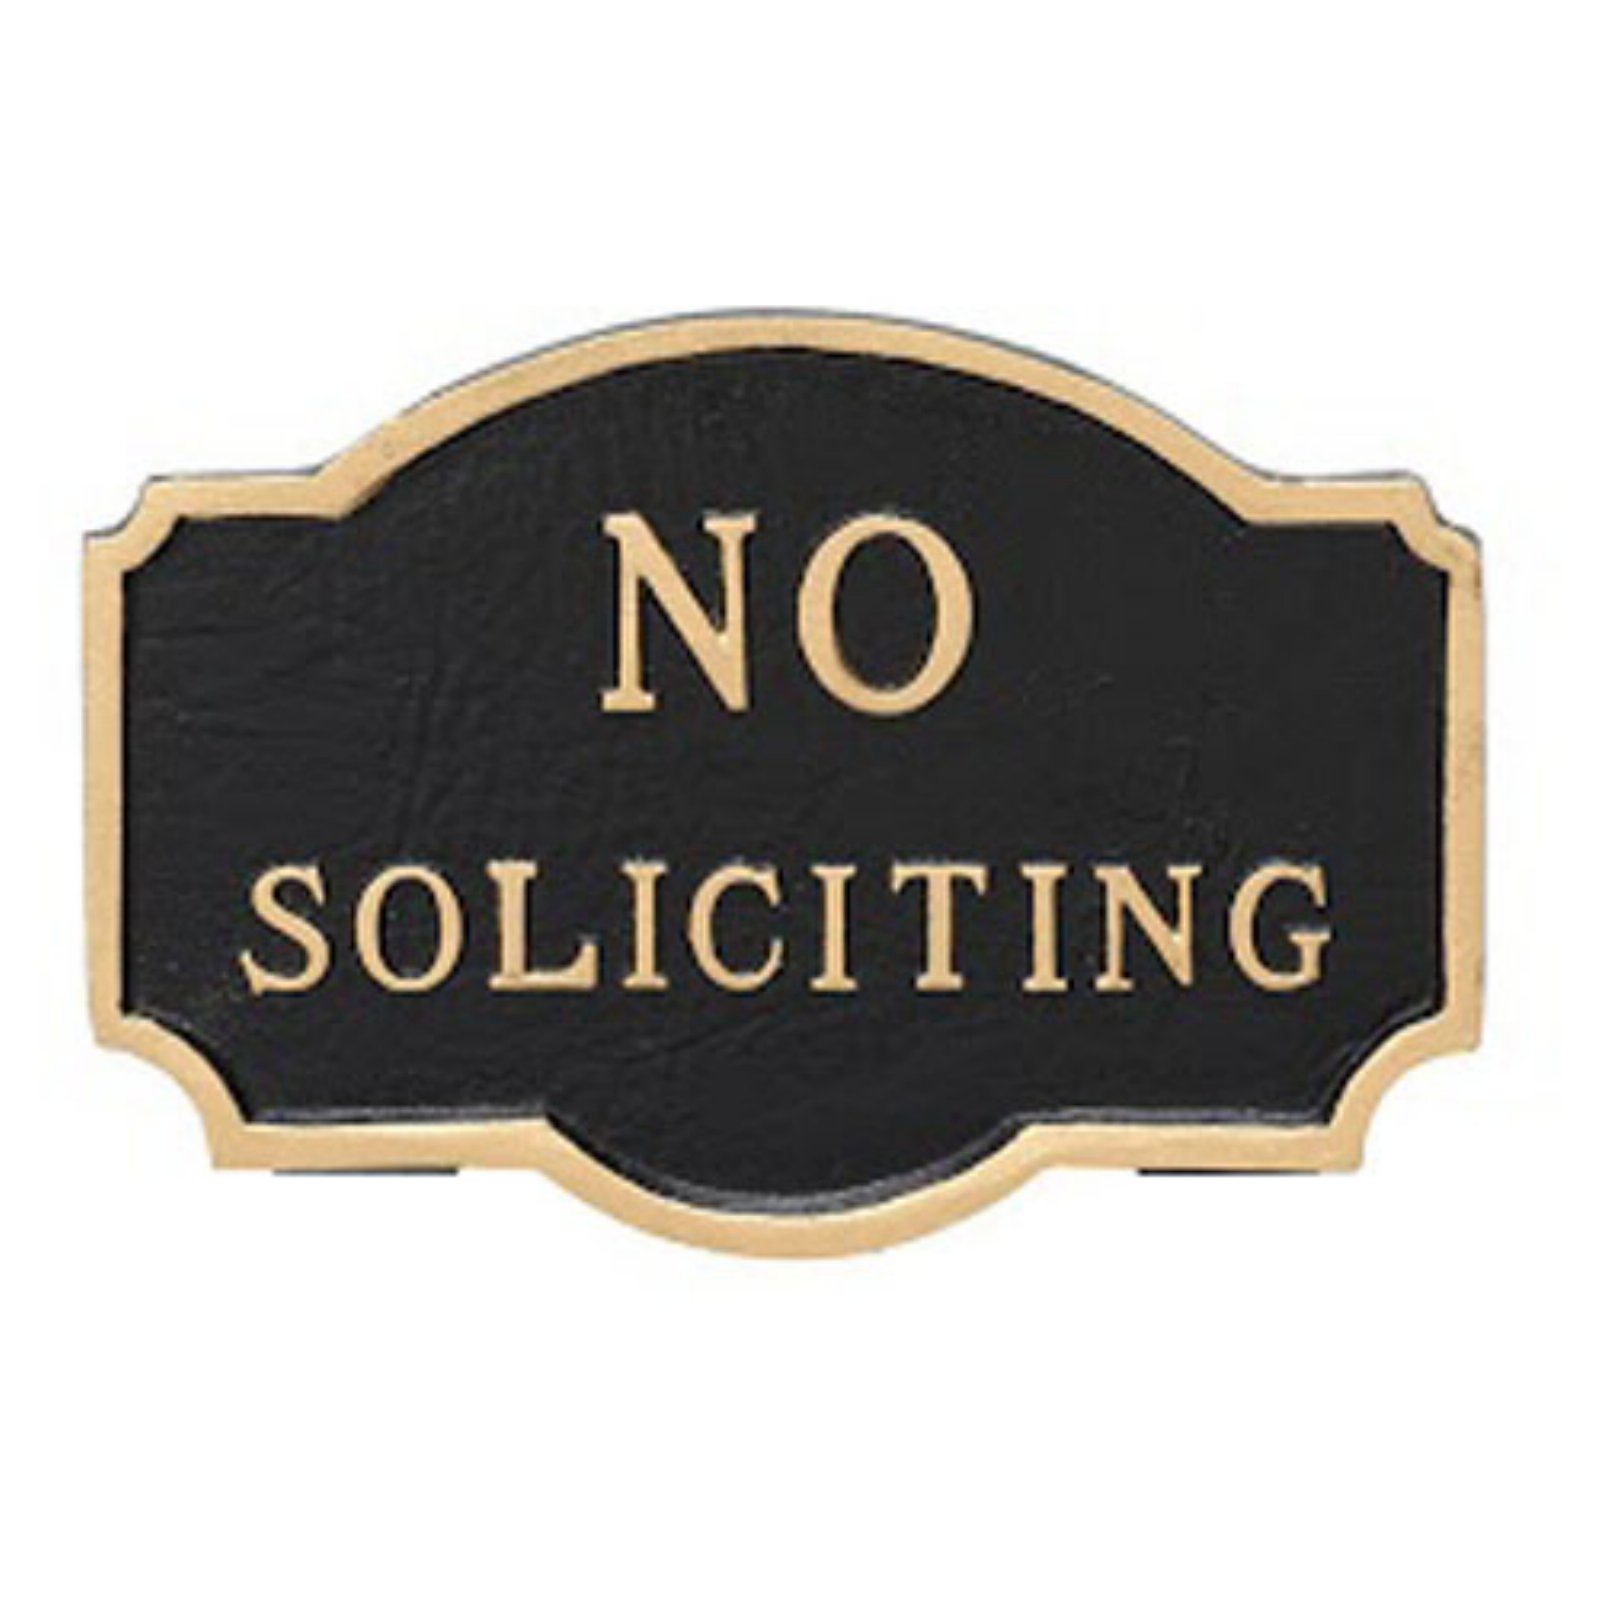 montague metal products petite montague no soliciting statement plaque, black with gold letter, 4.5" x 7.15" - image 1 of 2